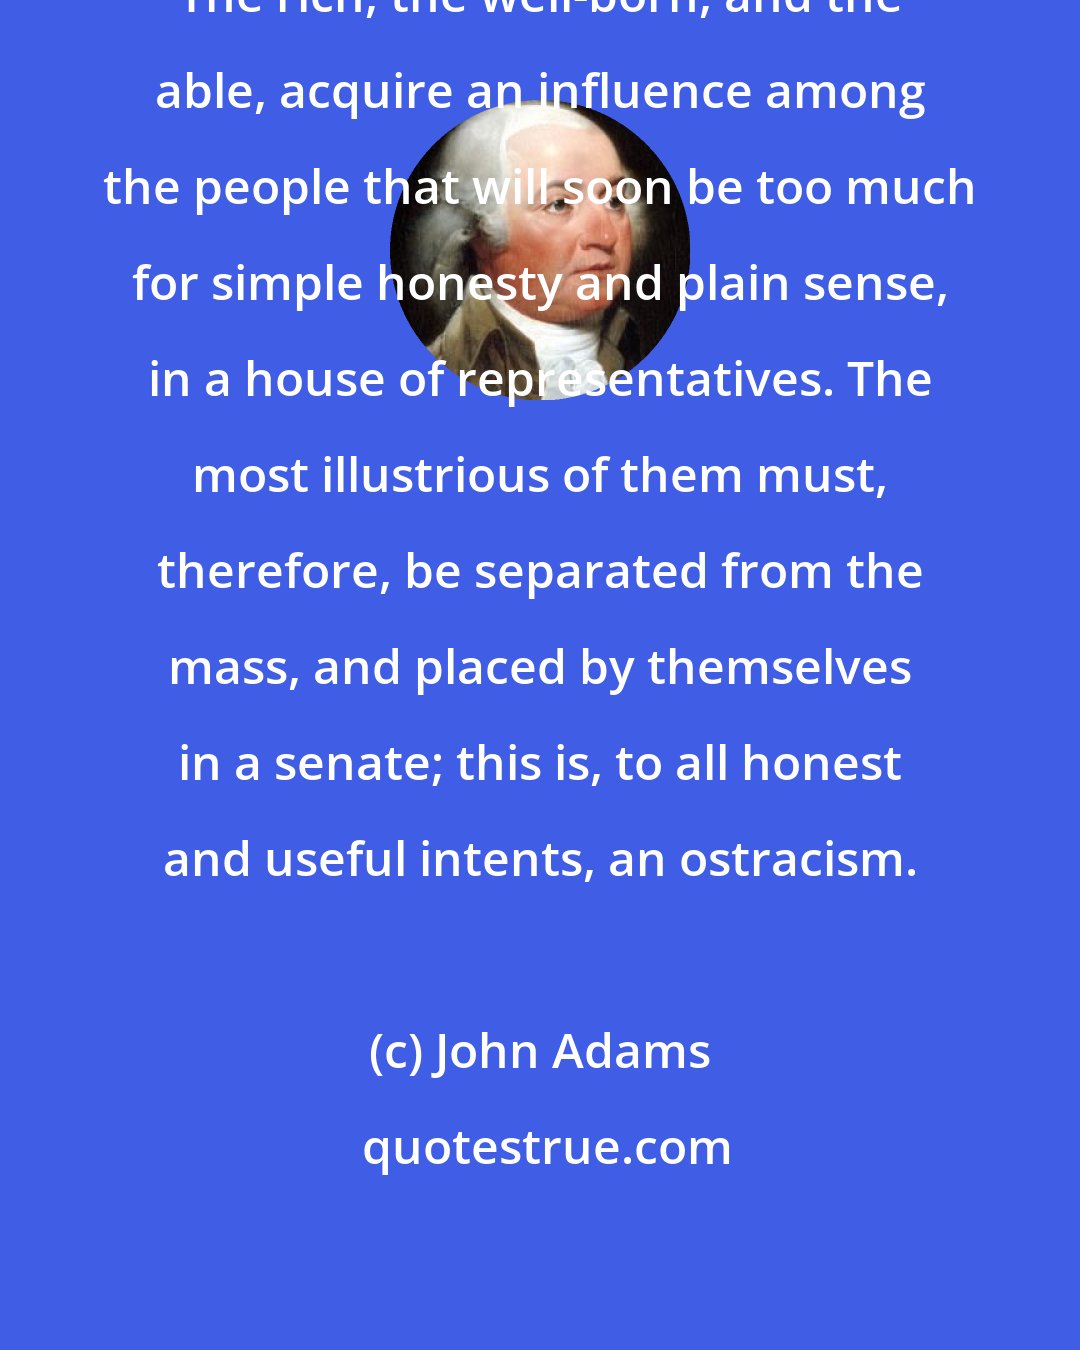 John Adams: The rich, the well-born, and the able, acquire an influence among the people that will soon be too much for simple honesty and plain sense, in a house of representatives. The most illustrious of them must, therefore, be separated from the mass, and placed by themselves in a senate; this is, to all honest and useful intents, an ostracism.